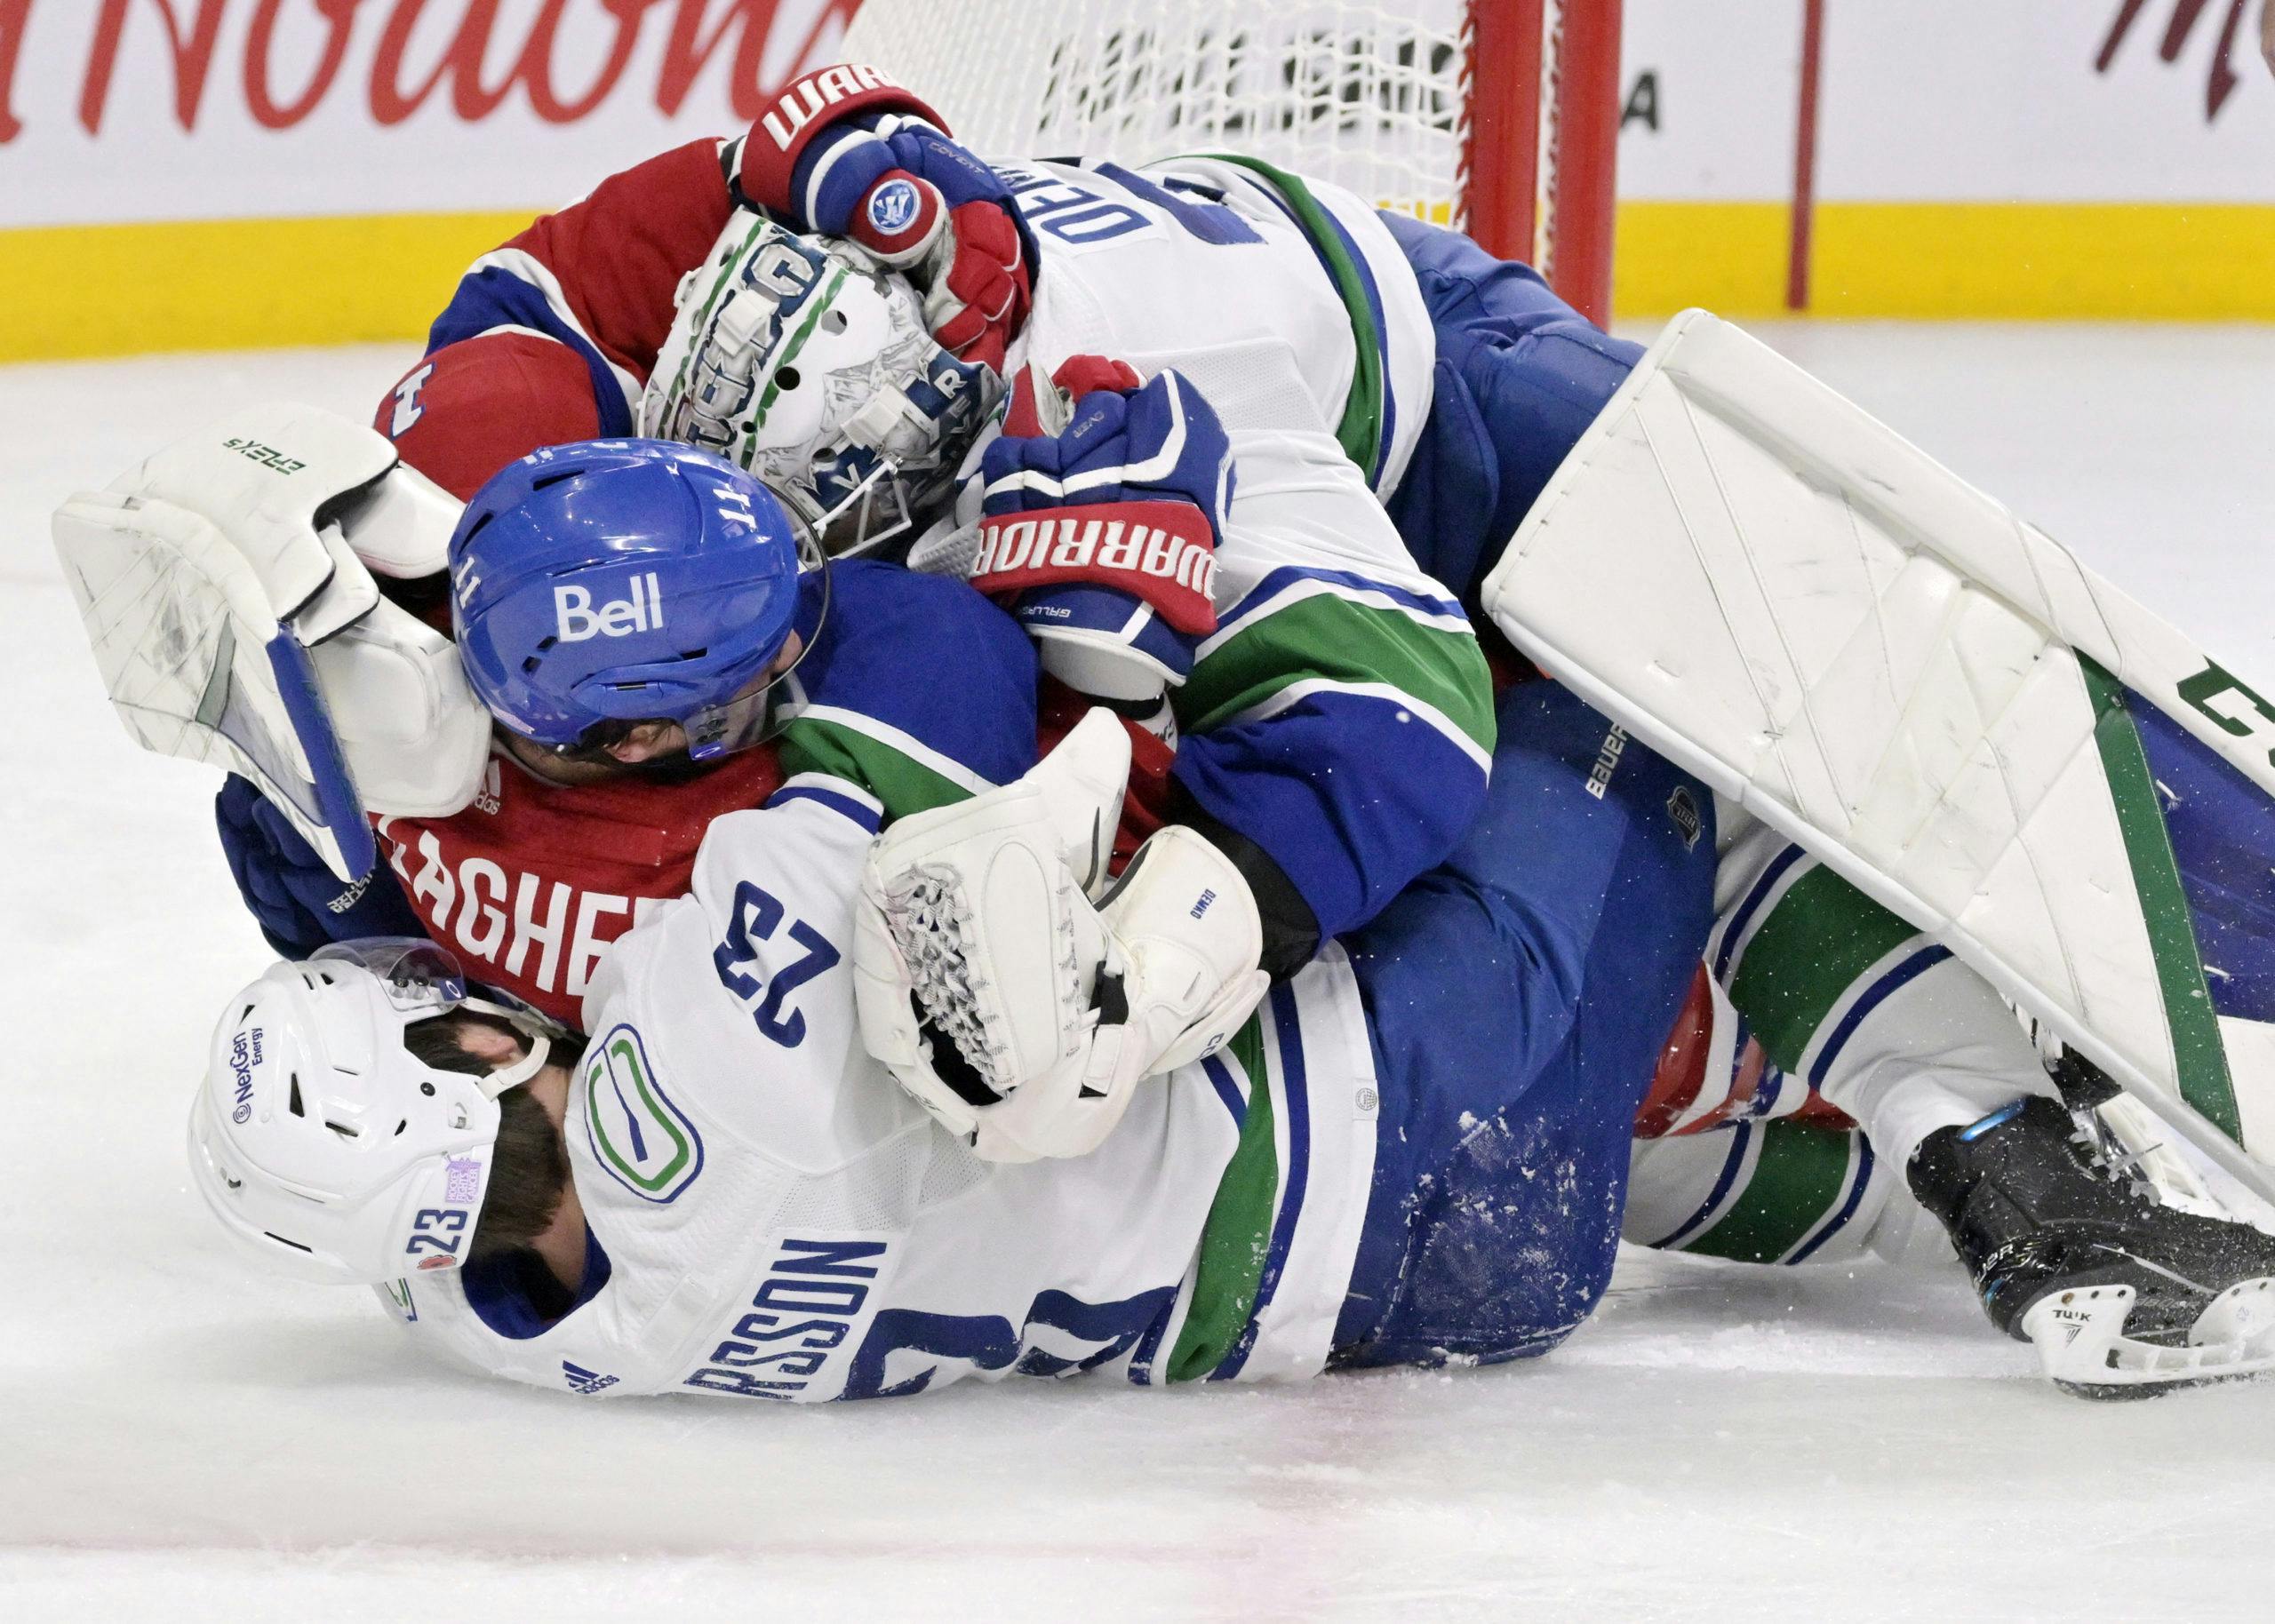 The Statsies: Thatcher Demko steals the show in a Canucks shutout victory -  CanucksArmy